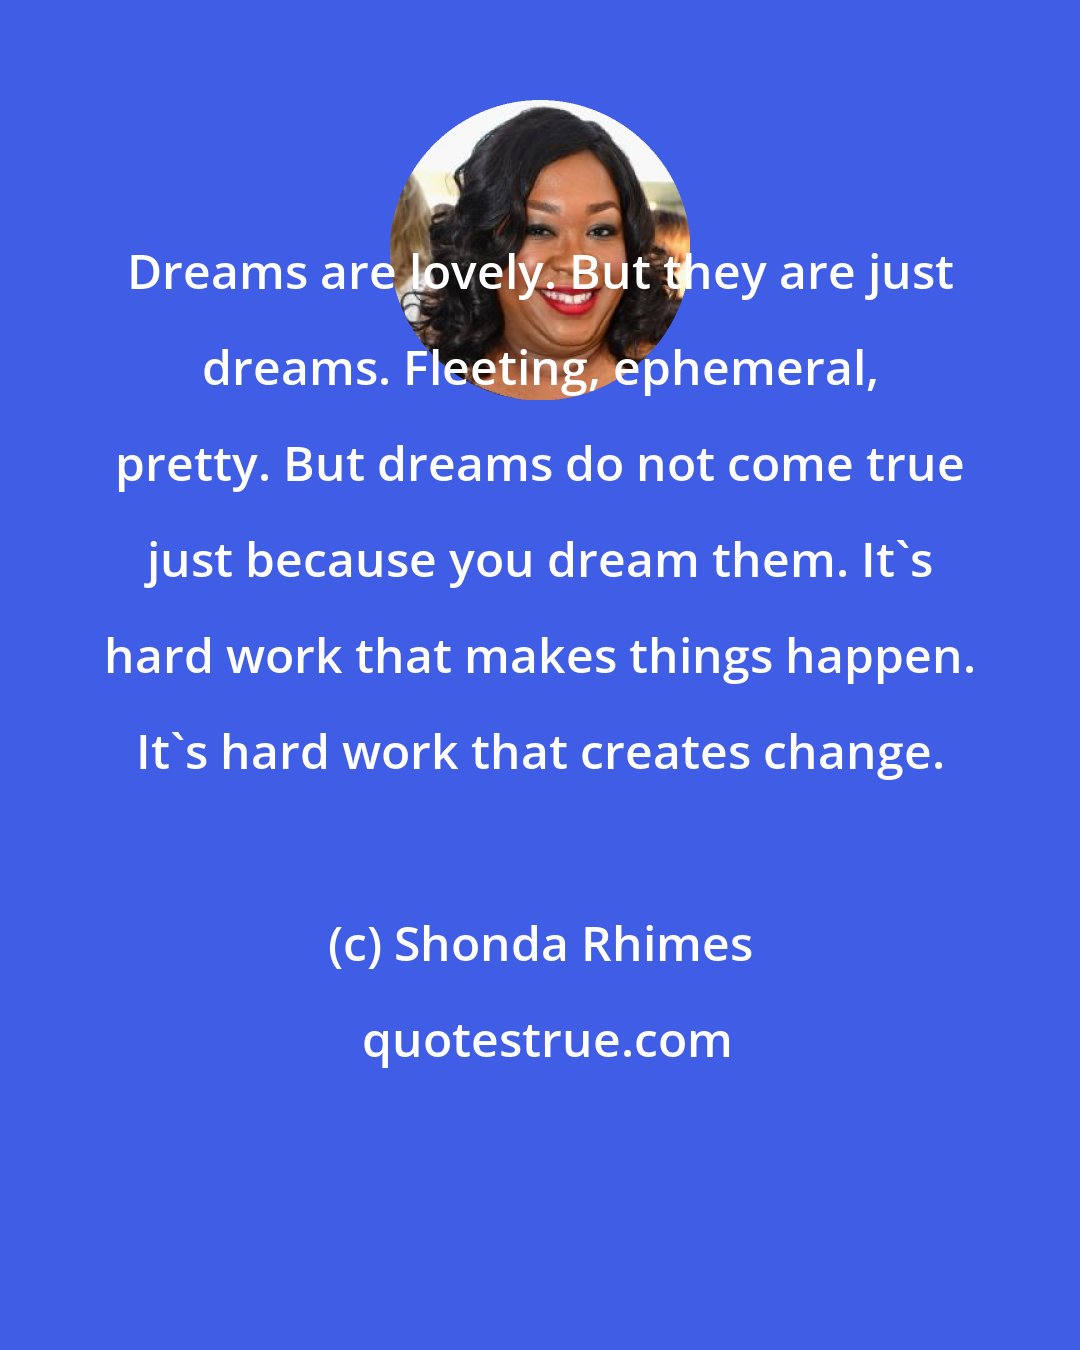 Shonda Rhimes: Dreams are lovely. But they are just dreams. Fleeting, ephemeral, pretty. But dreams do not come true just because you dream them. It's hard work that makes things happen. It's hard work that creates change.